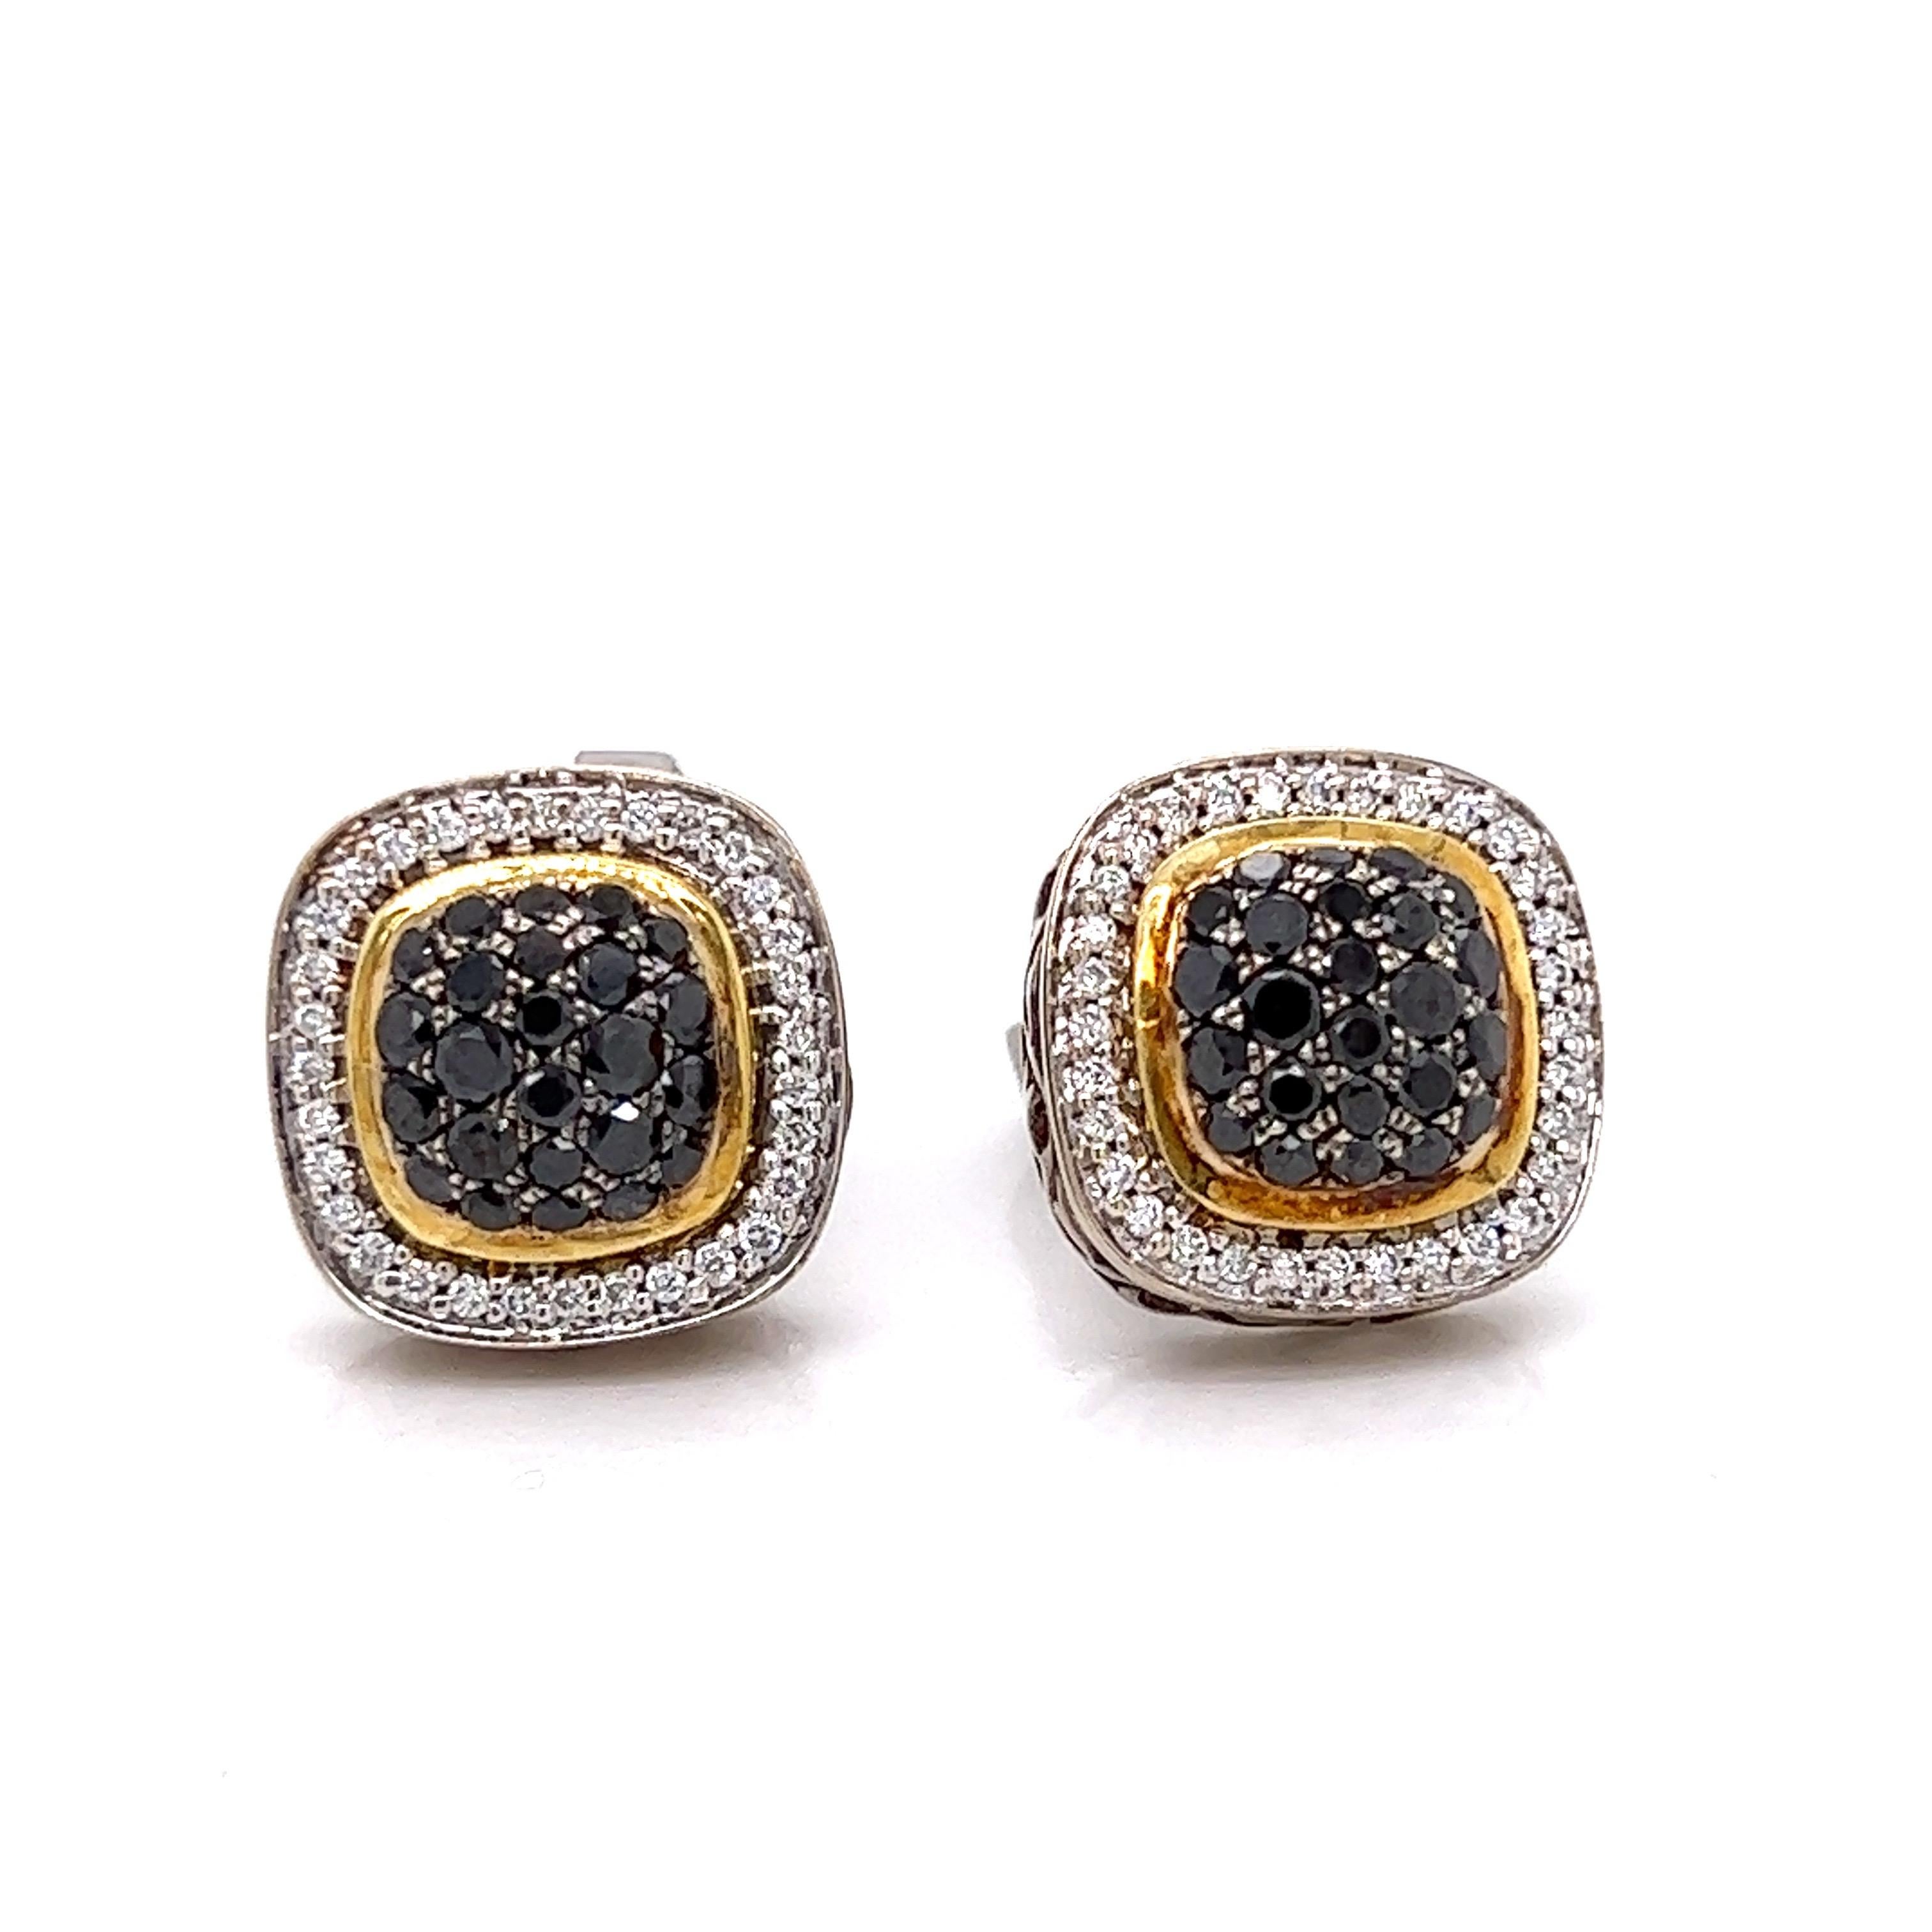 Contemporary Charles Krypell Diamond and Black Sapphire in Silver and 18 Kt Earrings